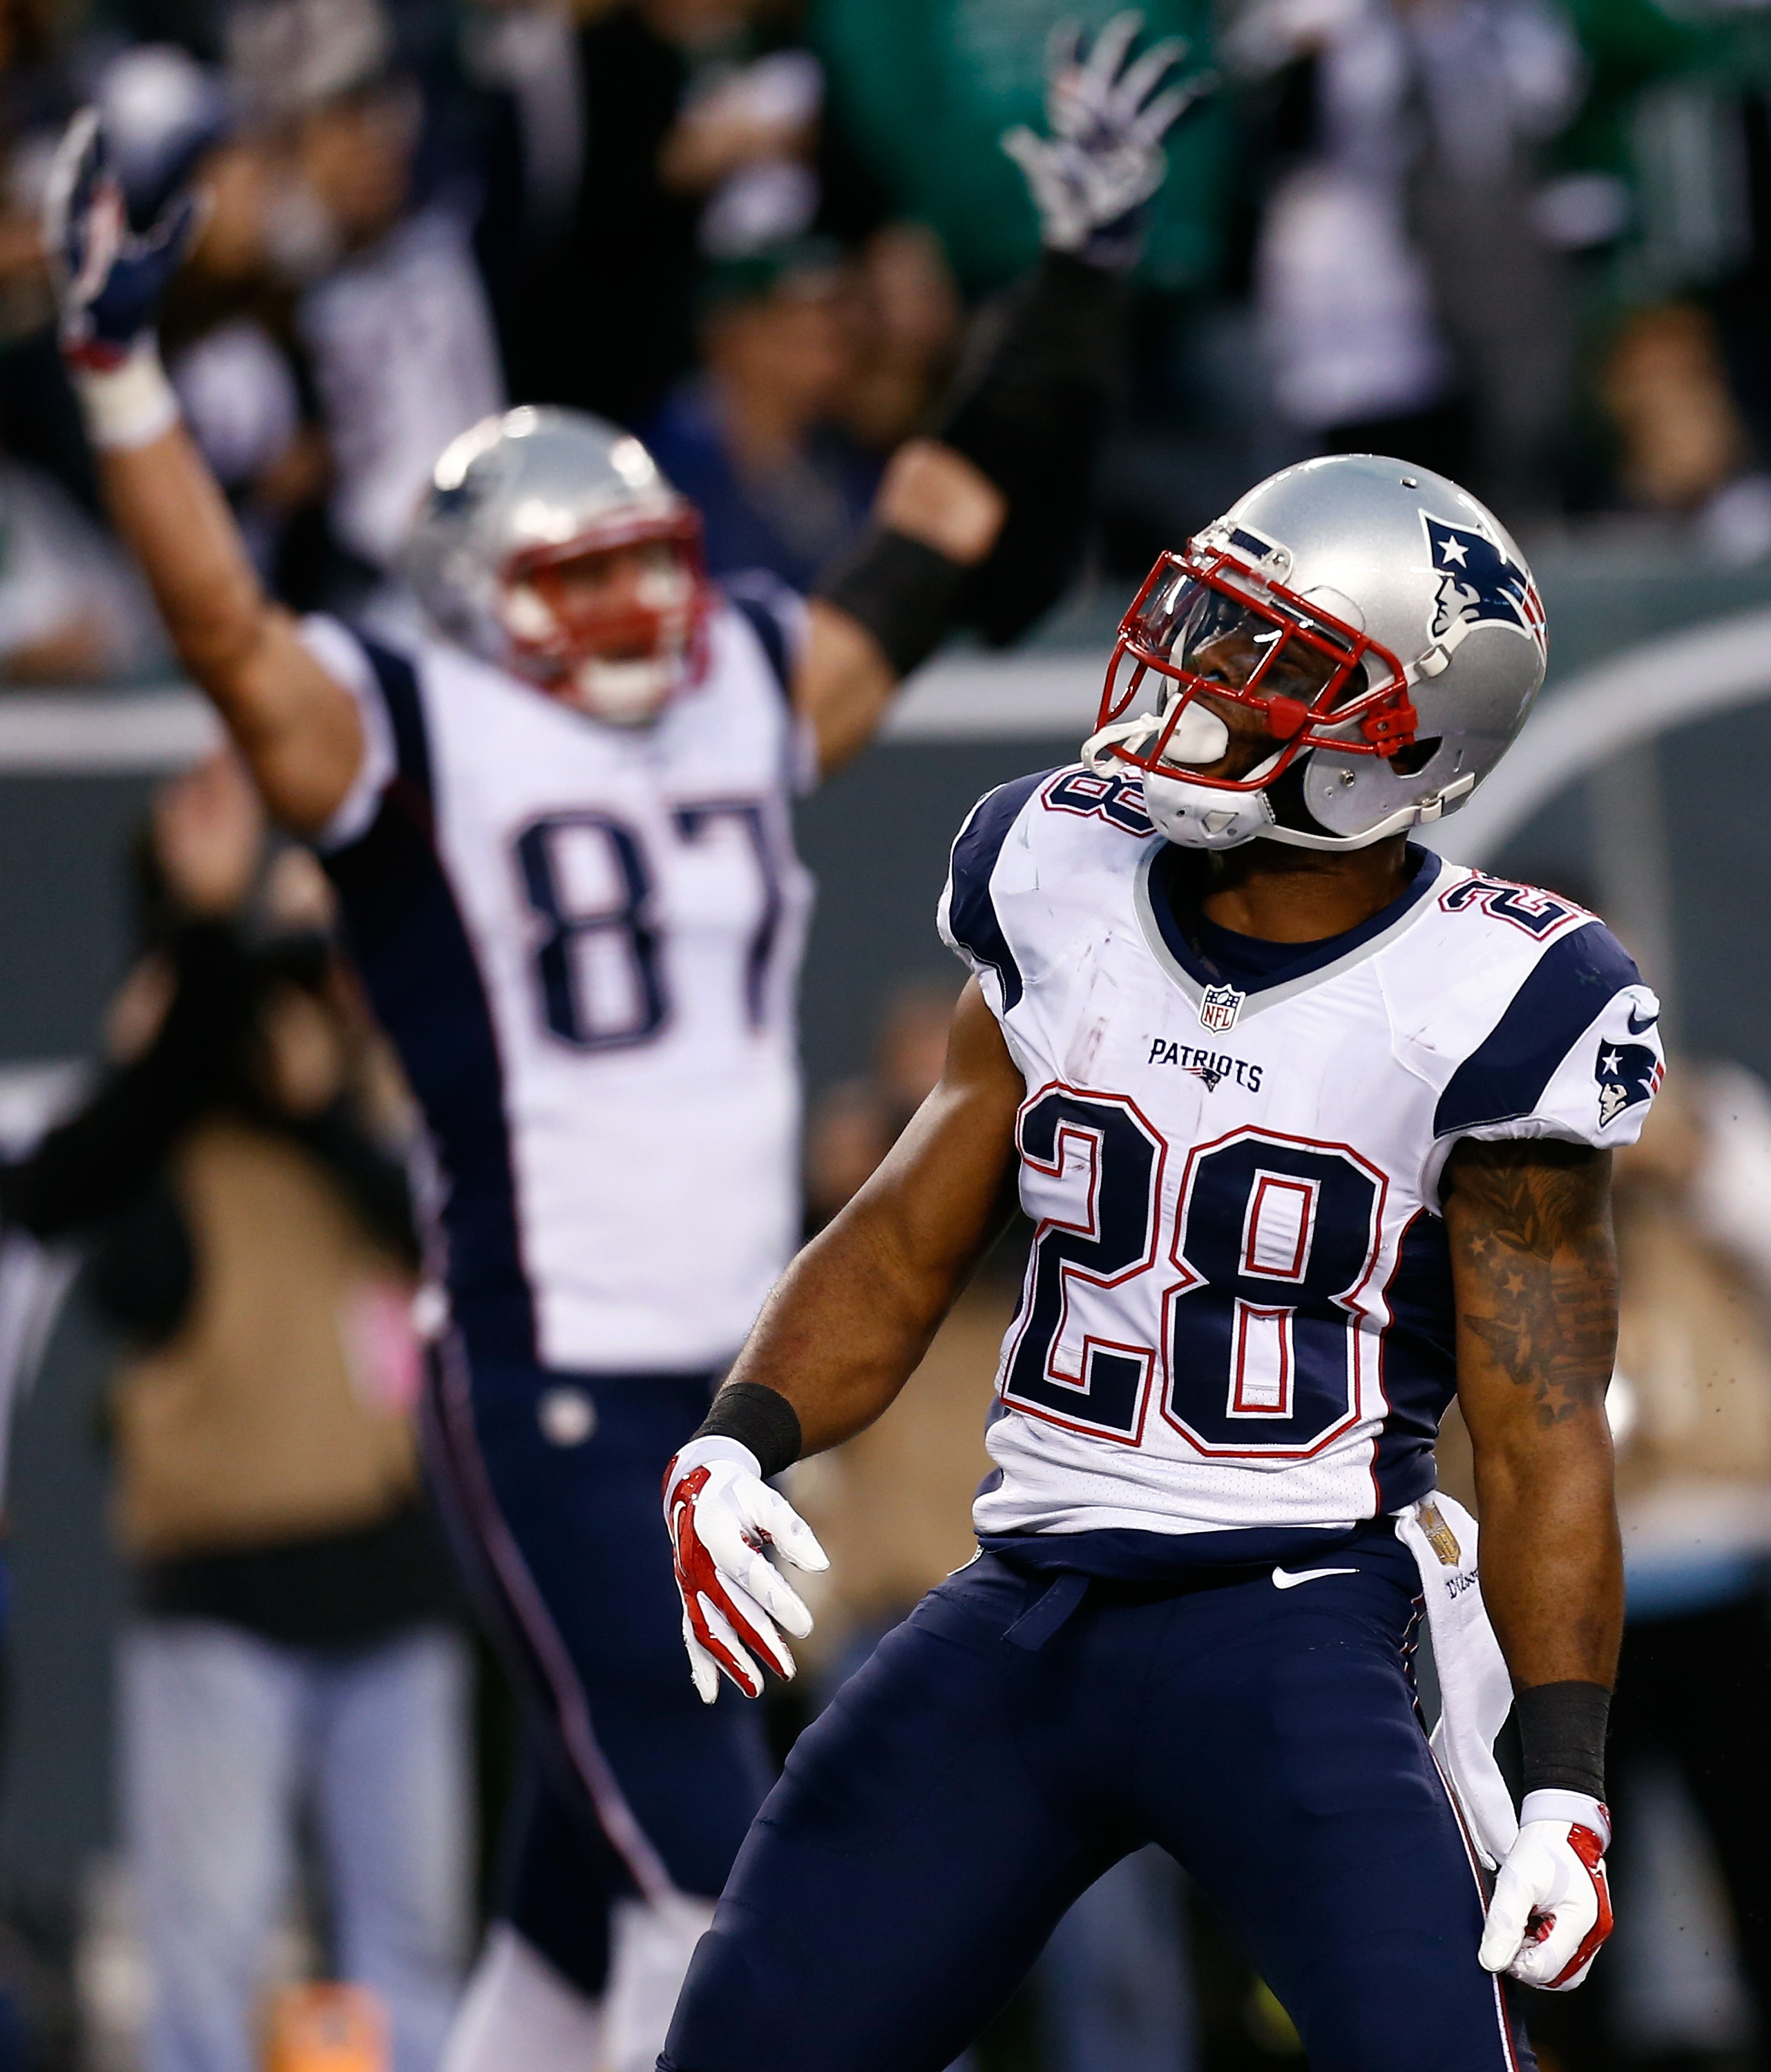 James White and Rob Gronkowski celebrate a touchdown. (Photo by Jeff Zelevansky/Getty Images)